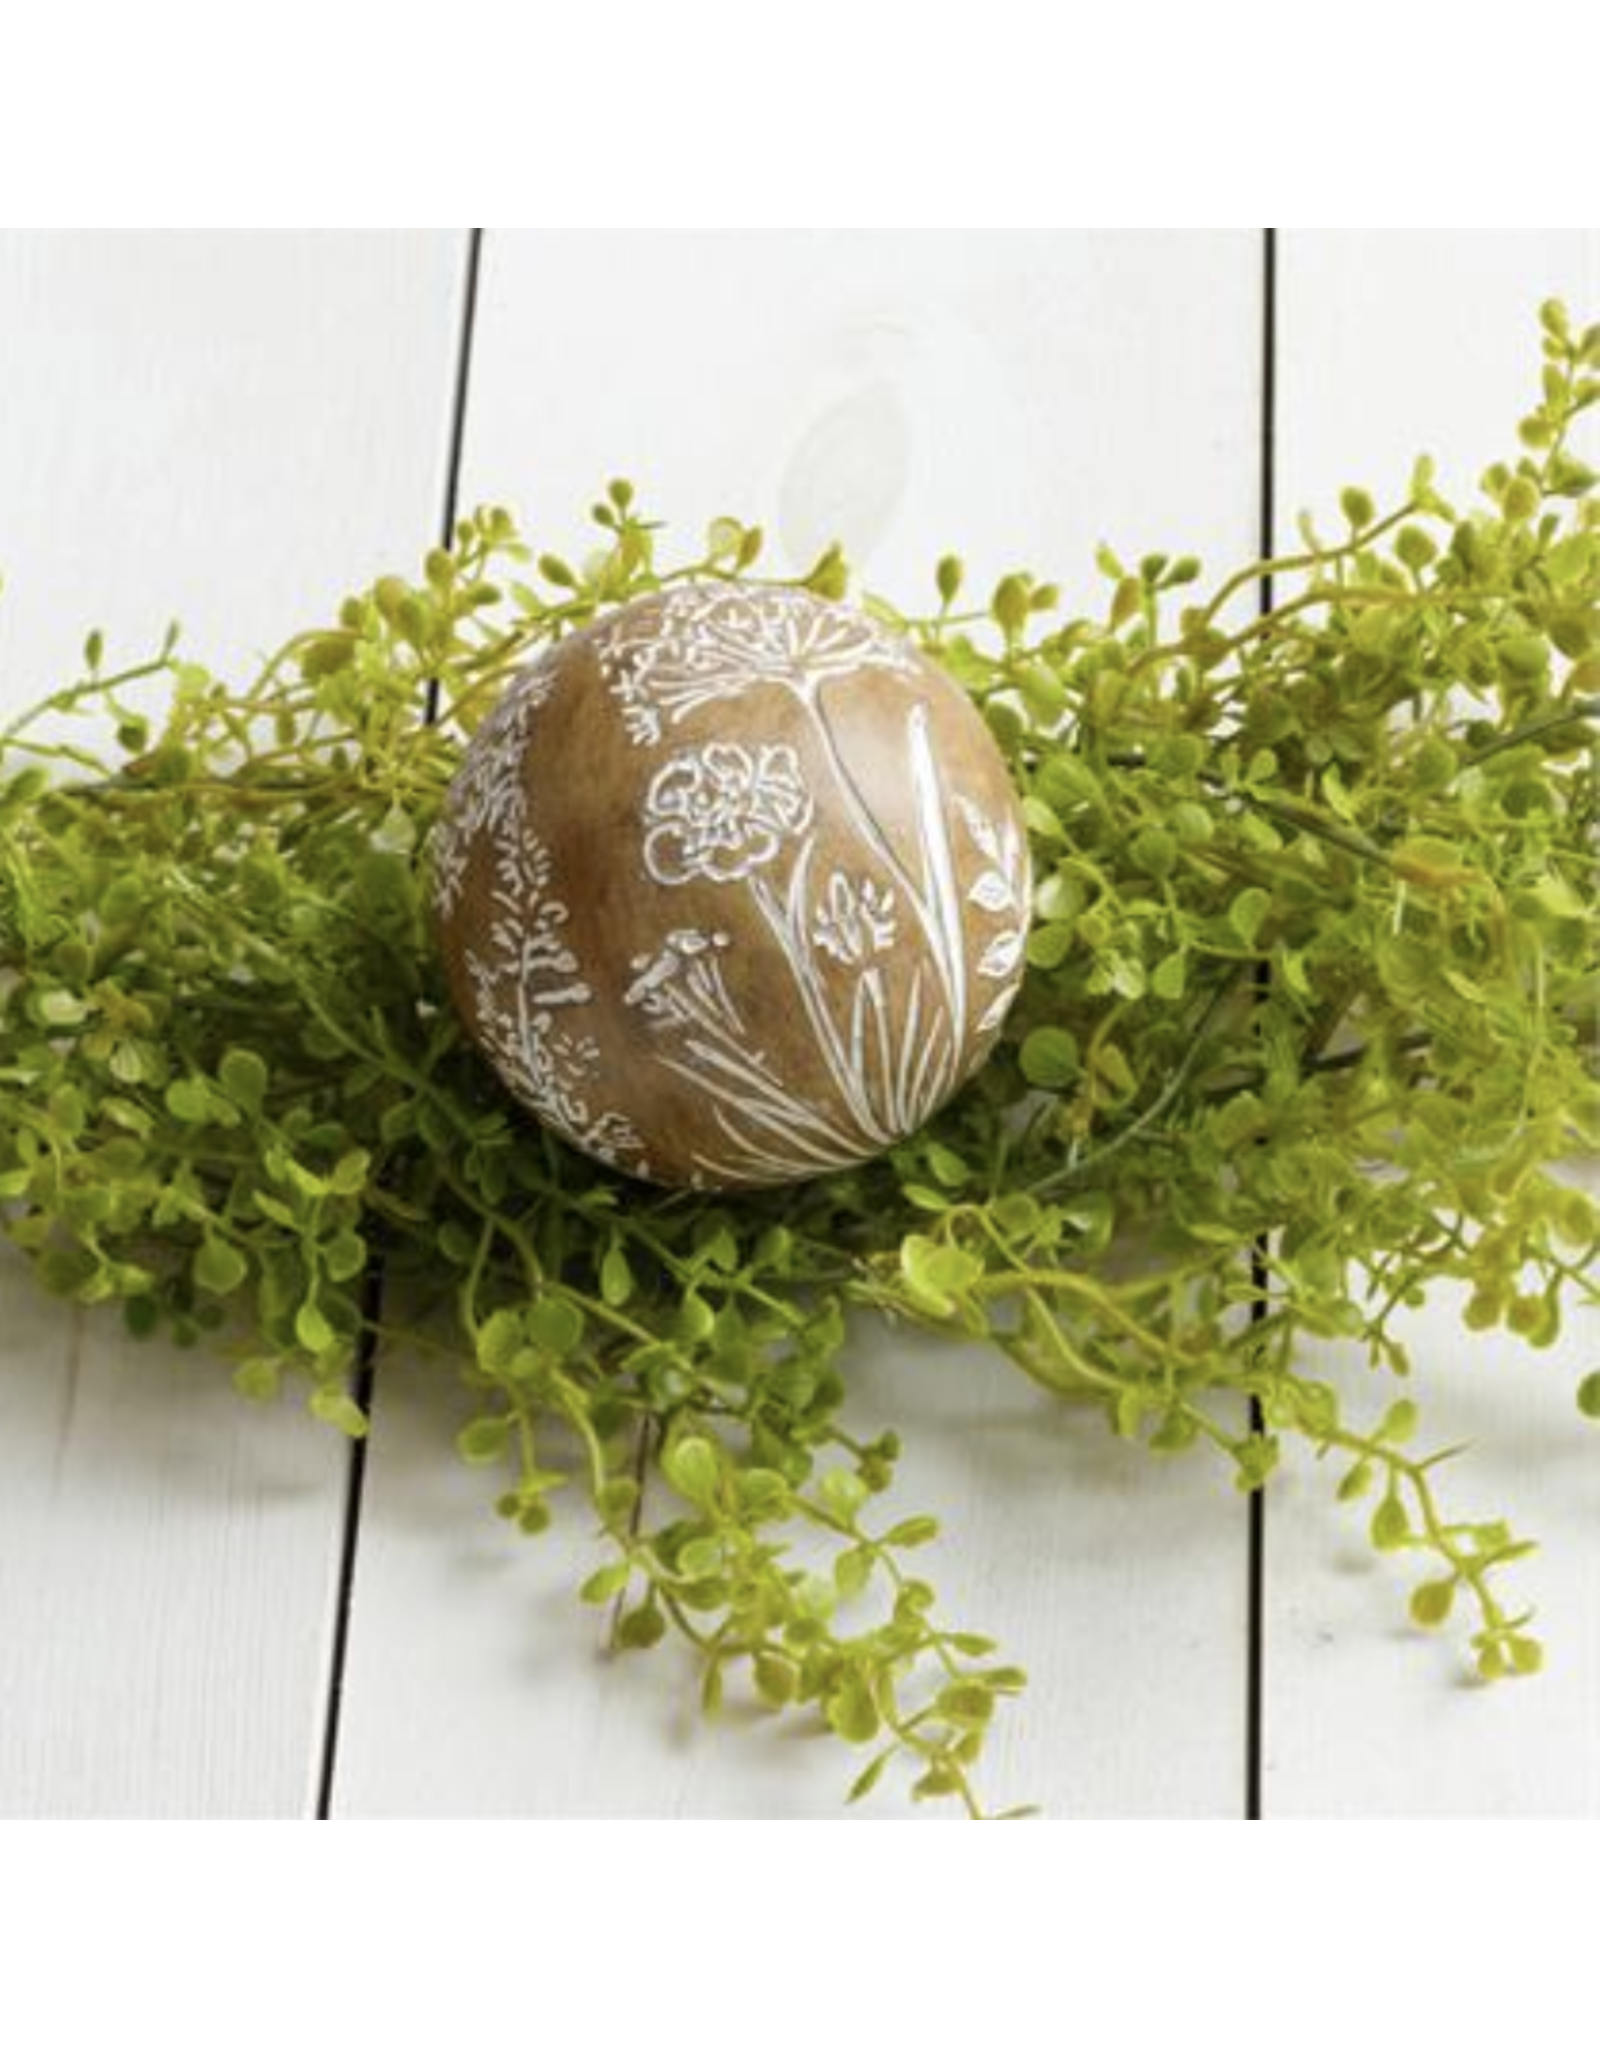 Audrey's Decorative Wood Orb with Floral